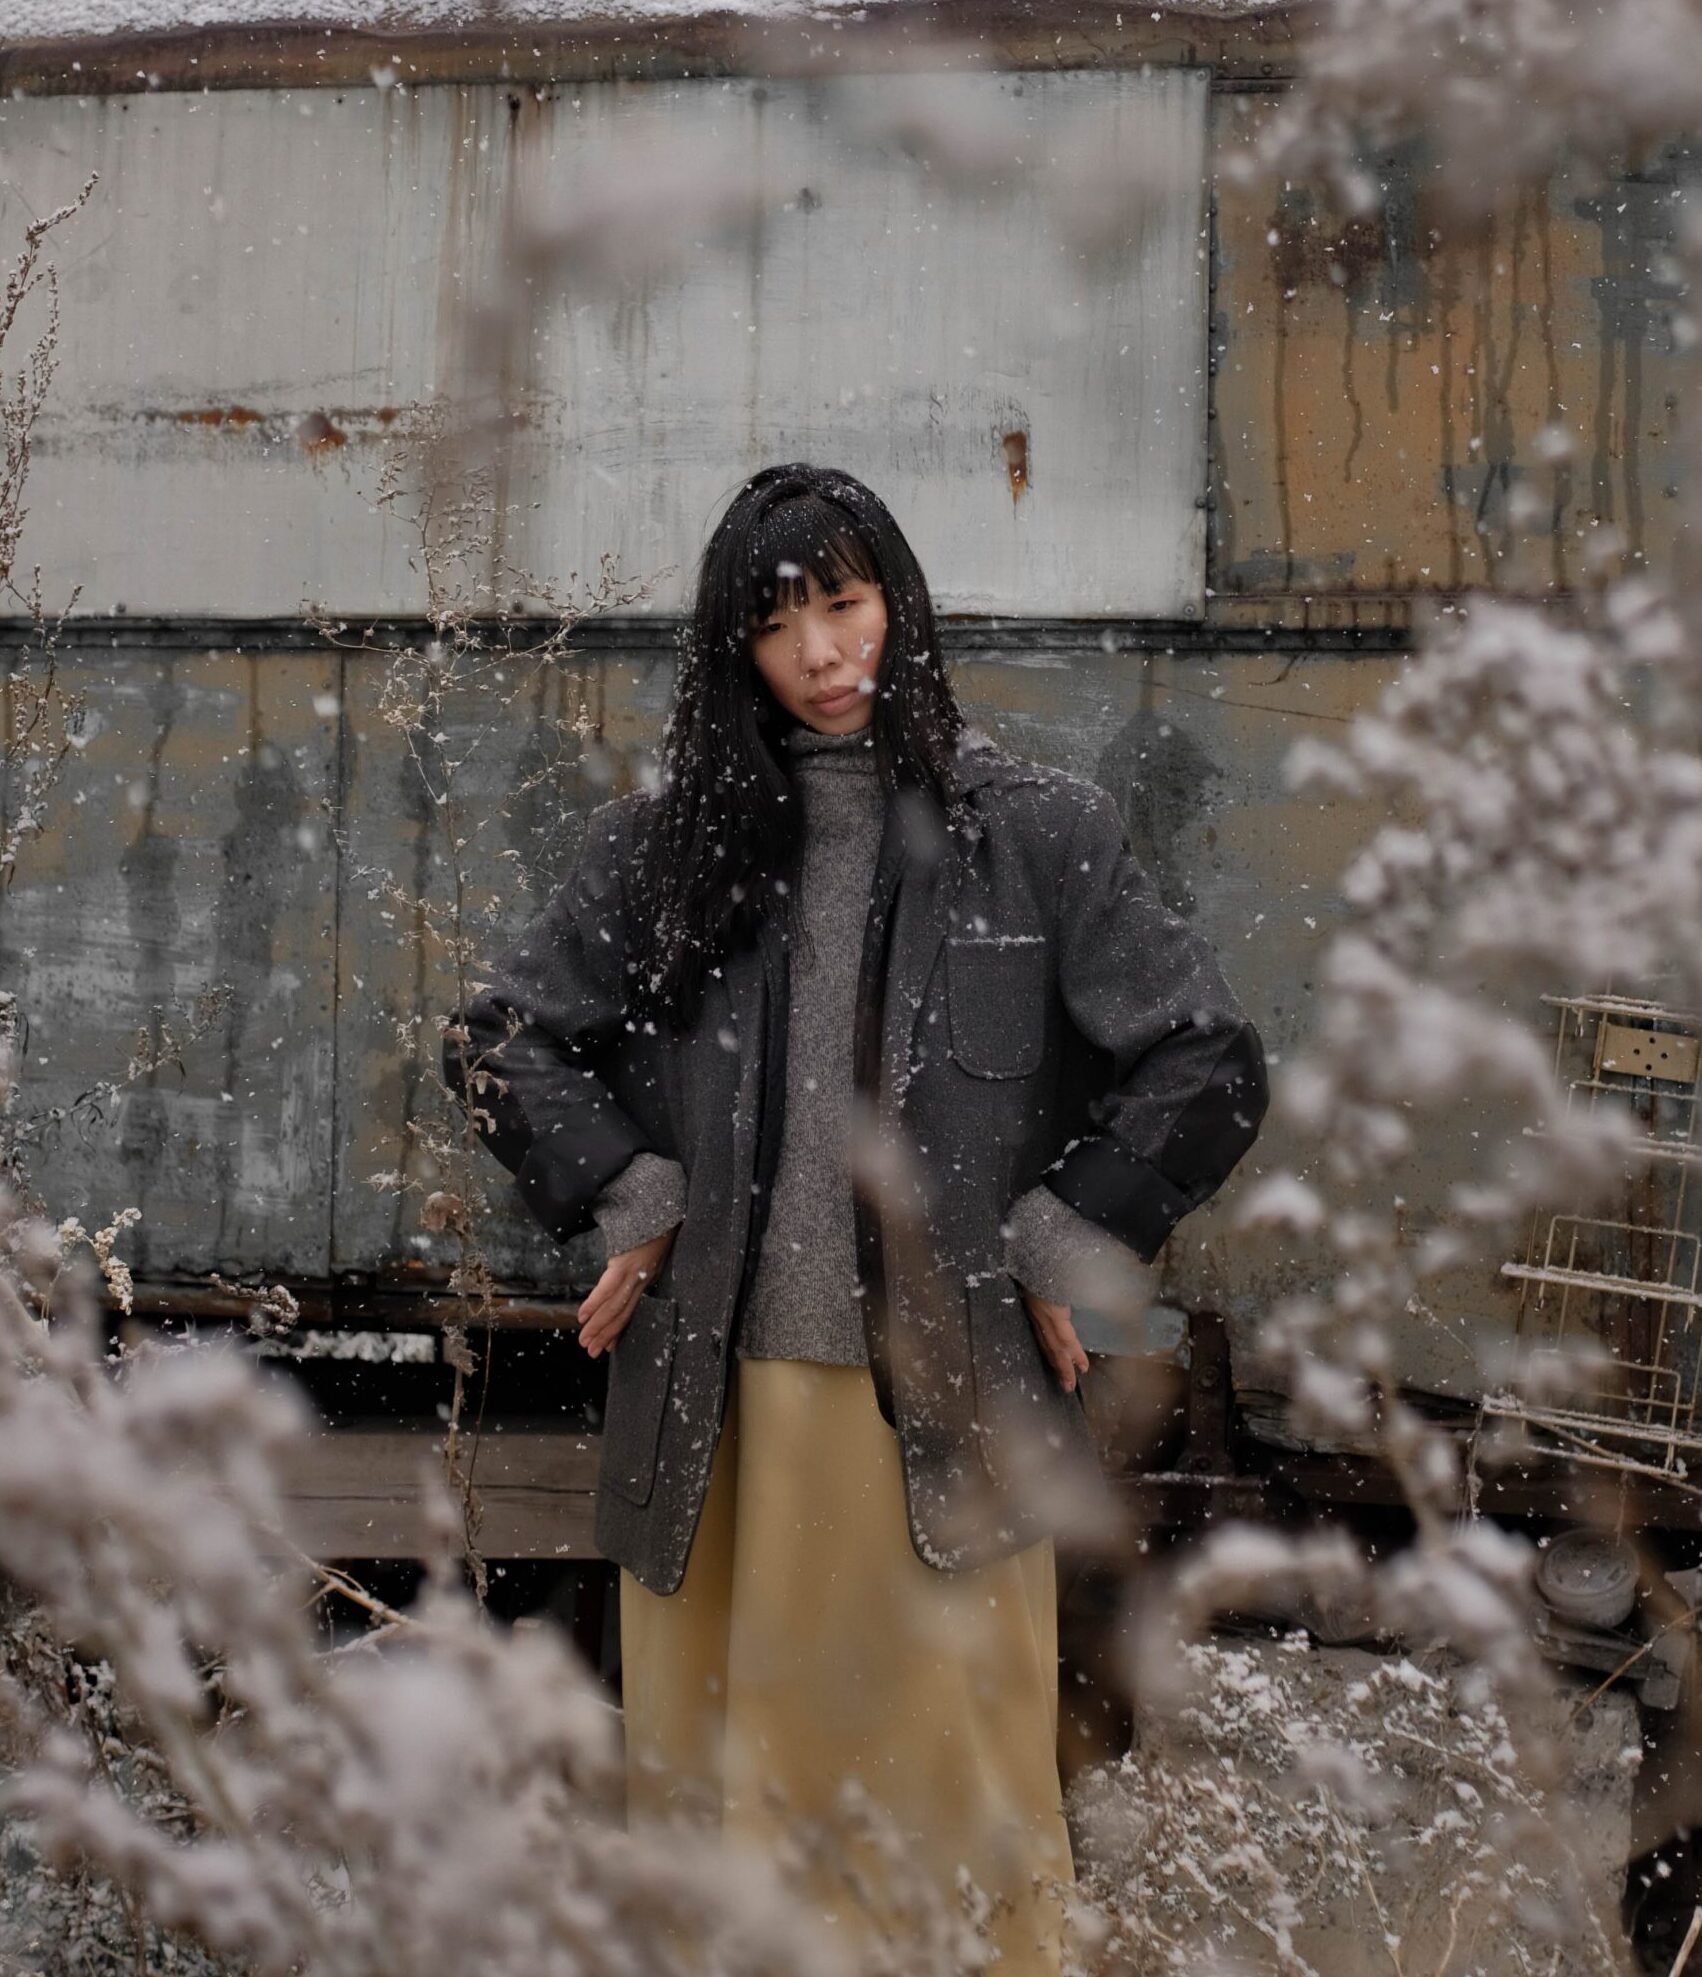 model standing outside in snow, wearing a long coat and skirt